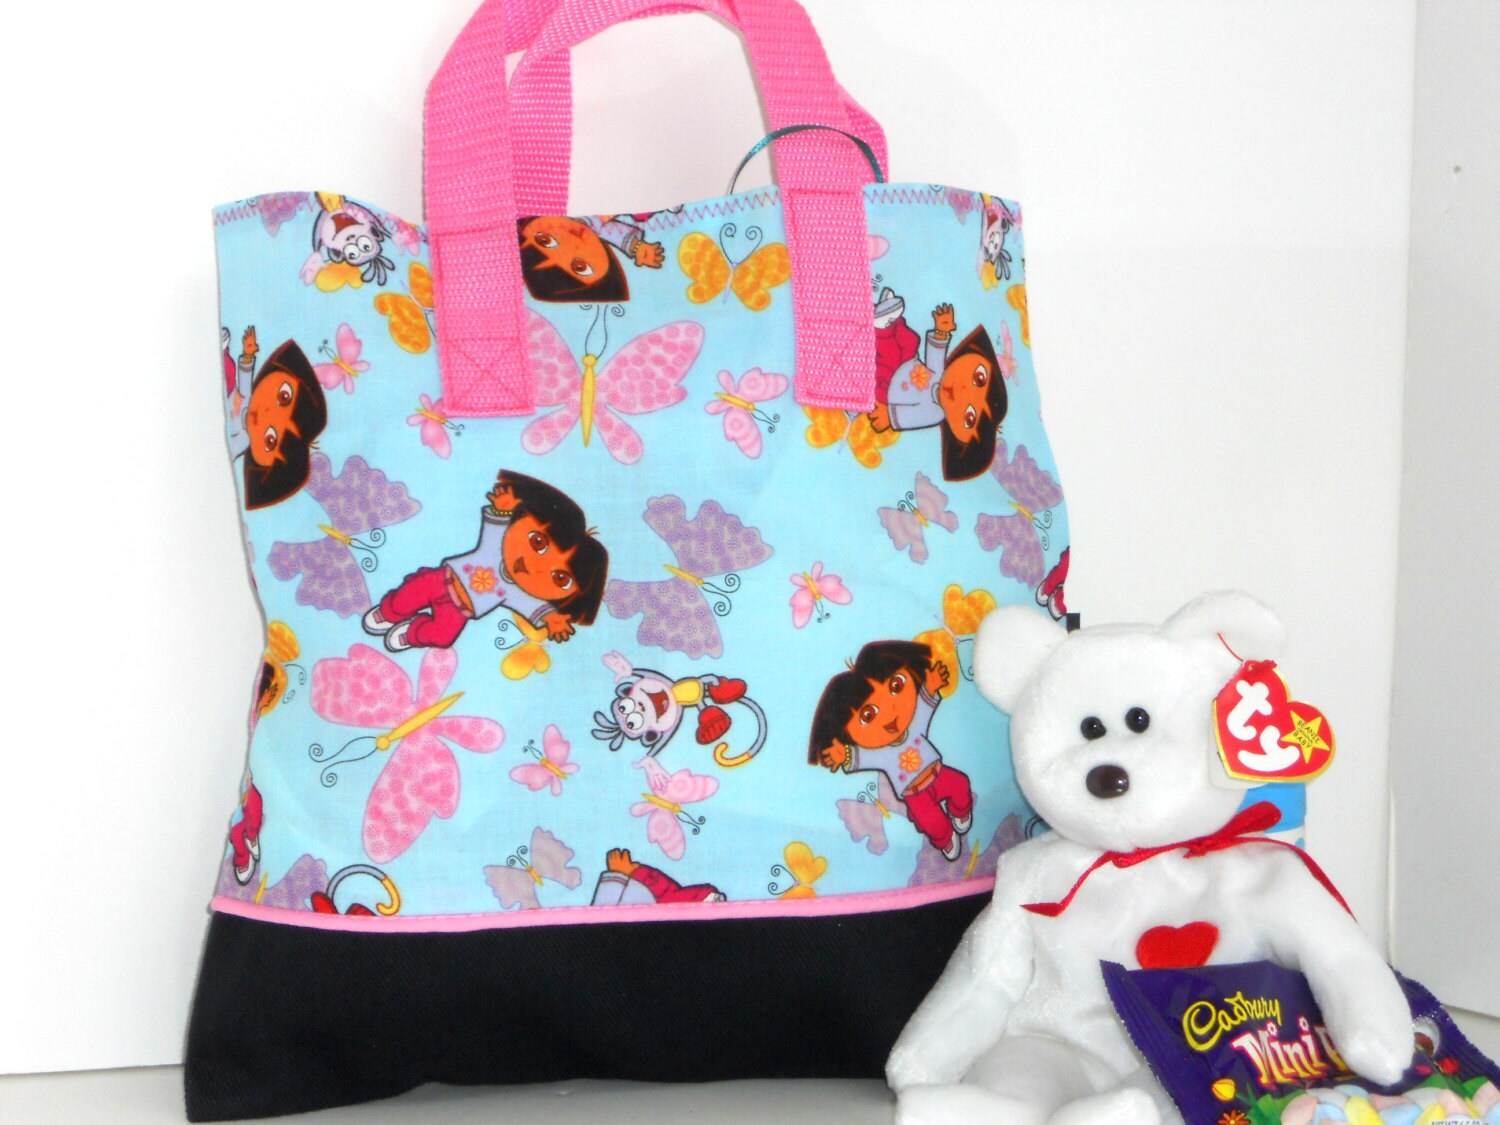 Dora Explorer Backpack Rescue Bag with Map,Pre-Kindergarten Toys Purple  Christmas gifts - Price history & Review | AliExpress Seller - Judy Wen's  store | Alitools.io